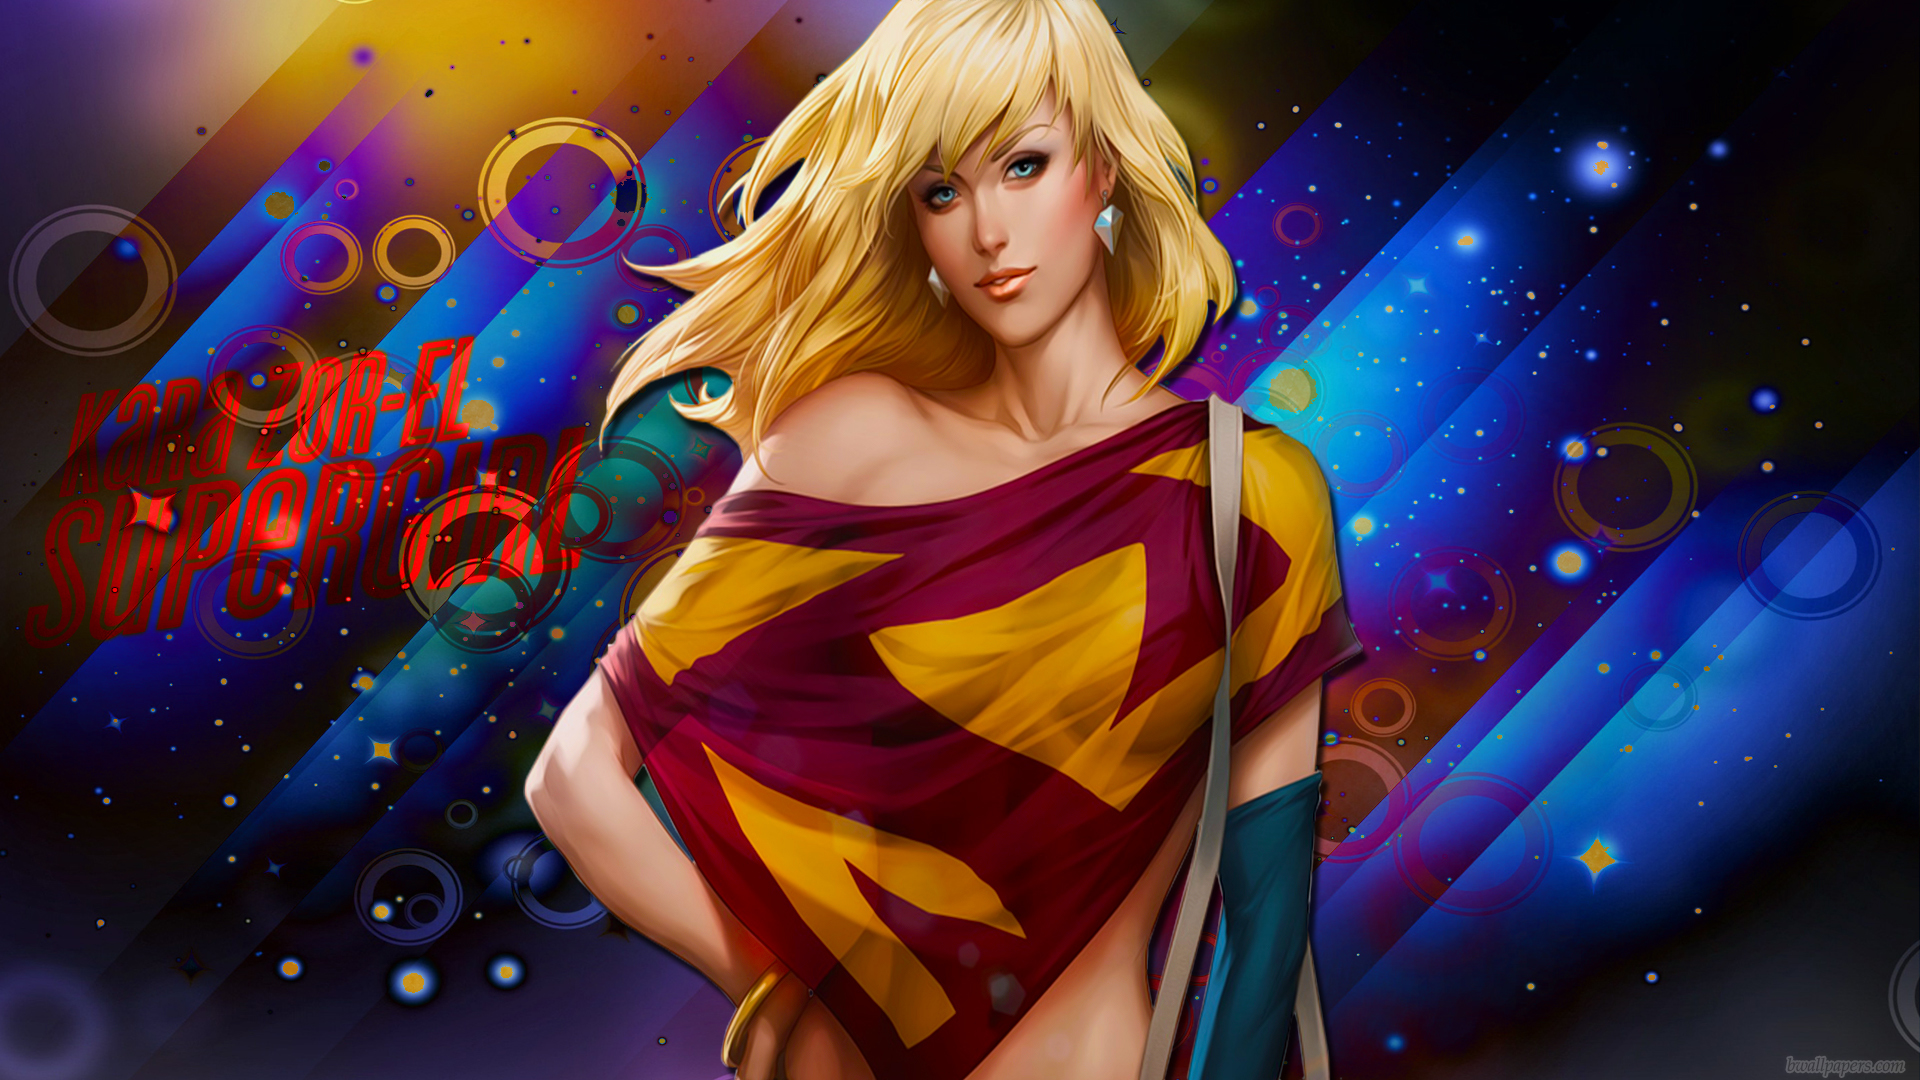 Supergirl Background Wallpaper High Definition Quality